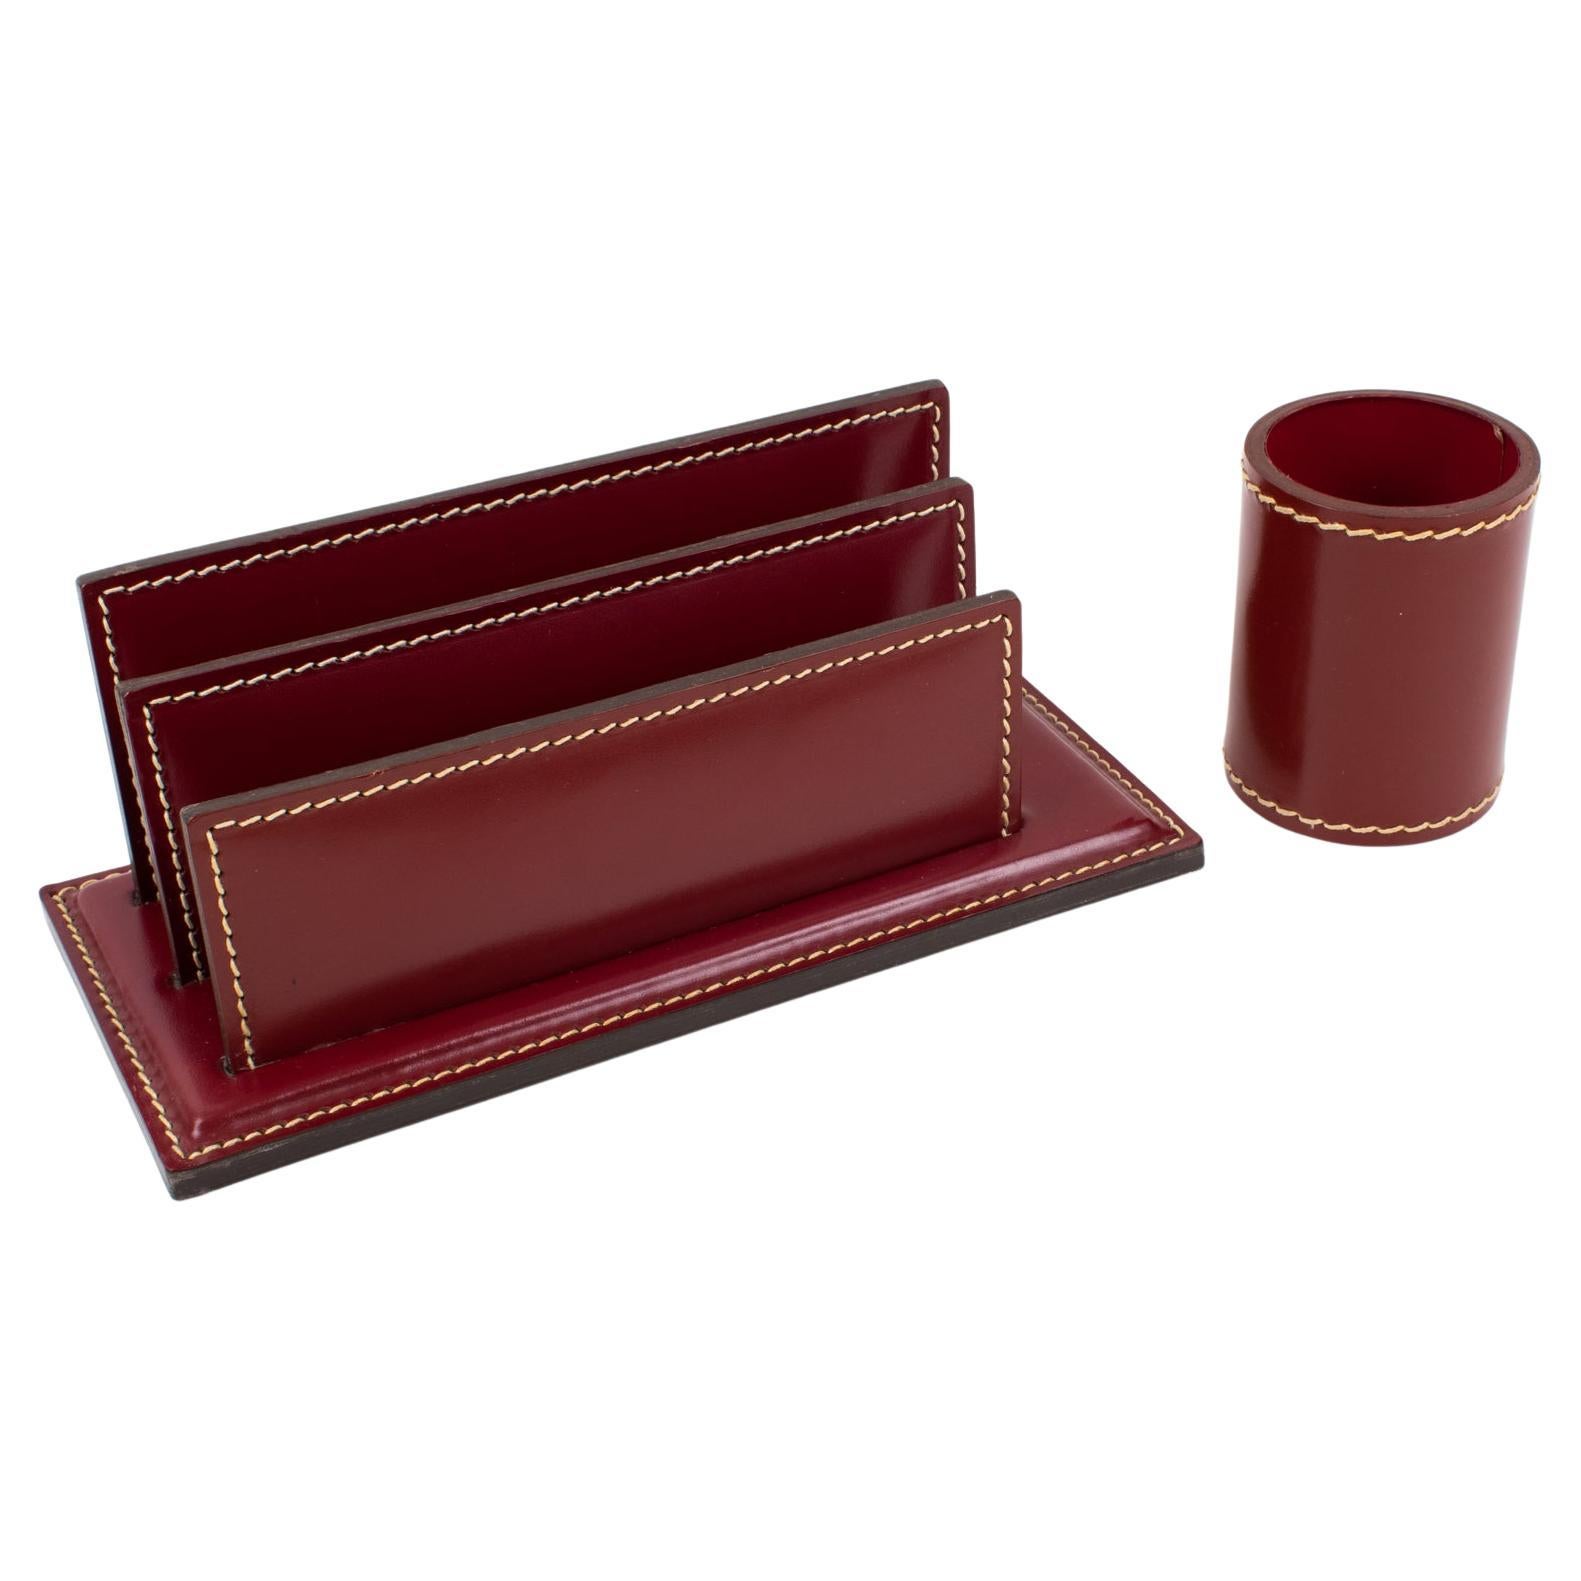 Art Deco Hand-Stitched Red Leather Desk Set Letter and Pen Holders